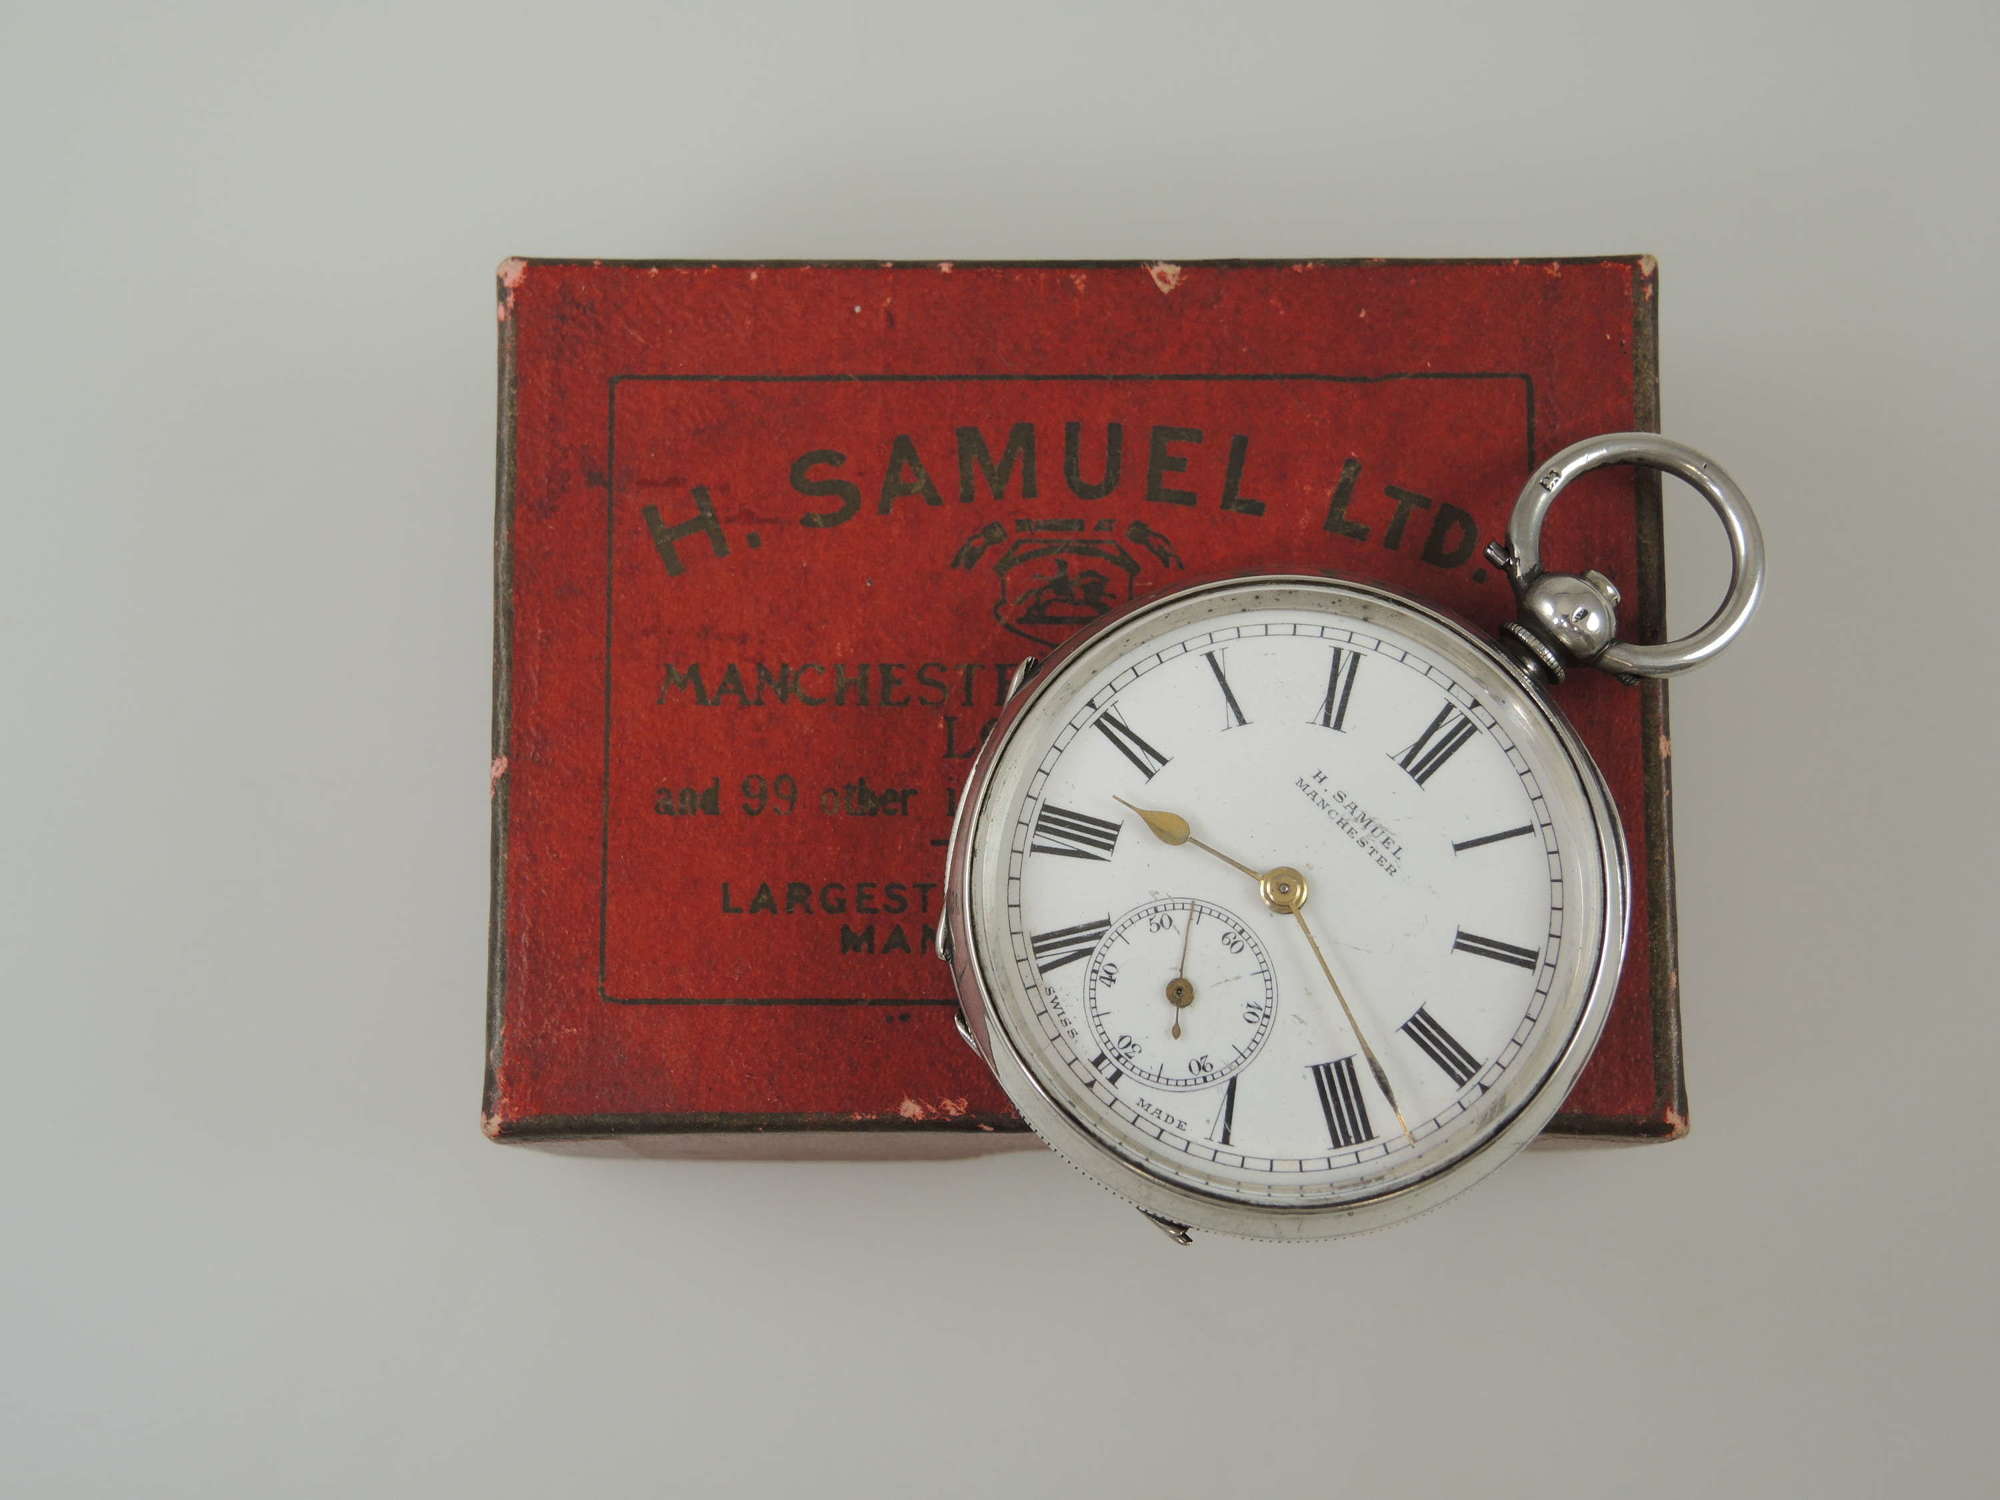 Vintage silver key wound pocket watch by H Samuel with box c1900